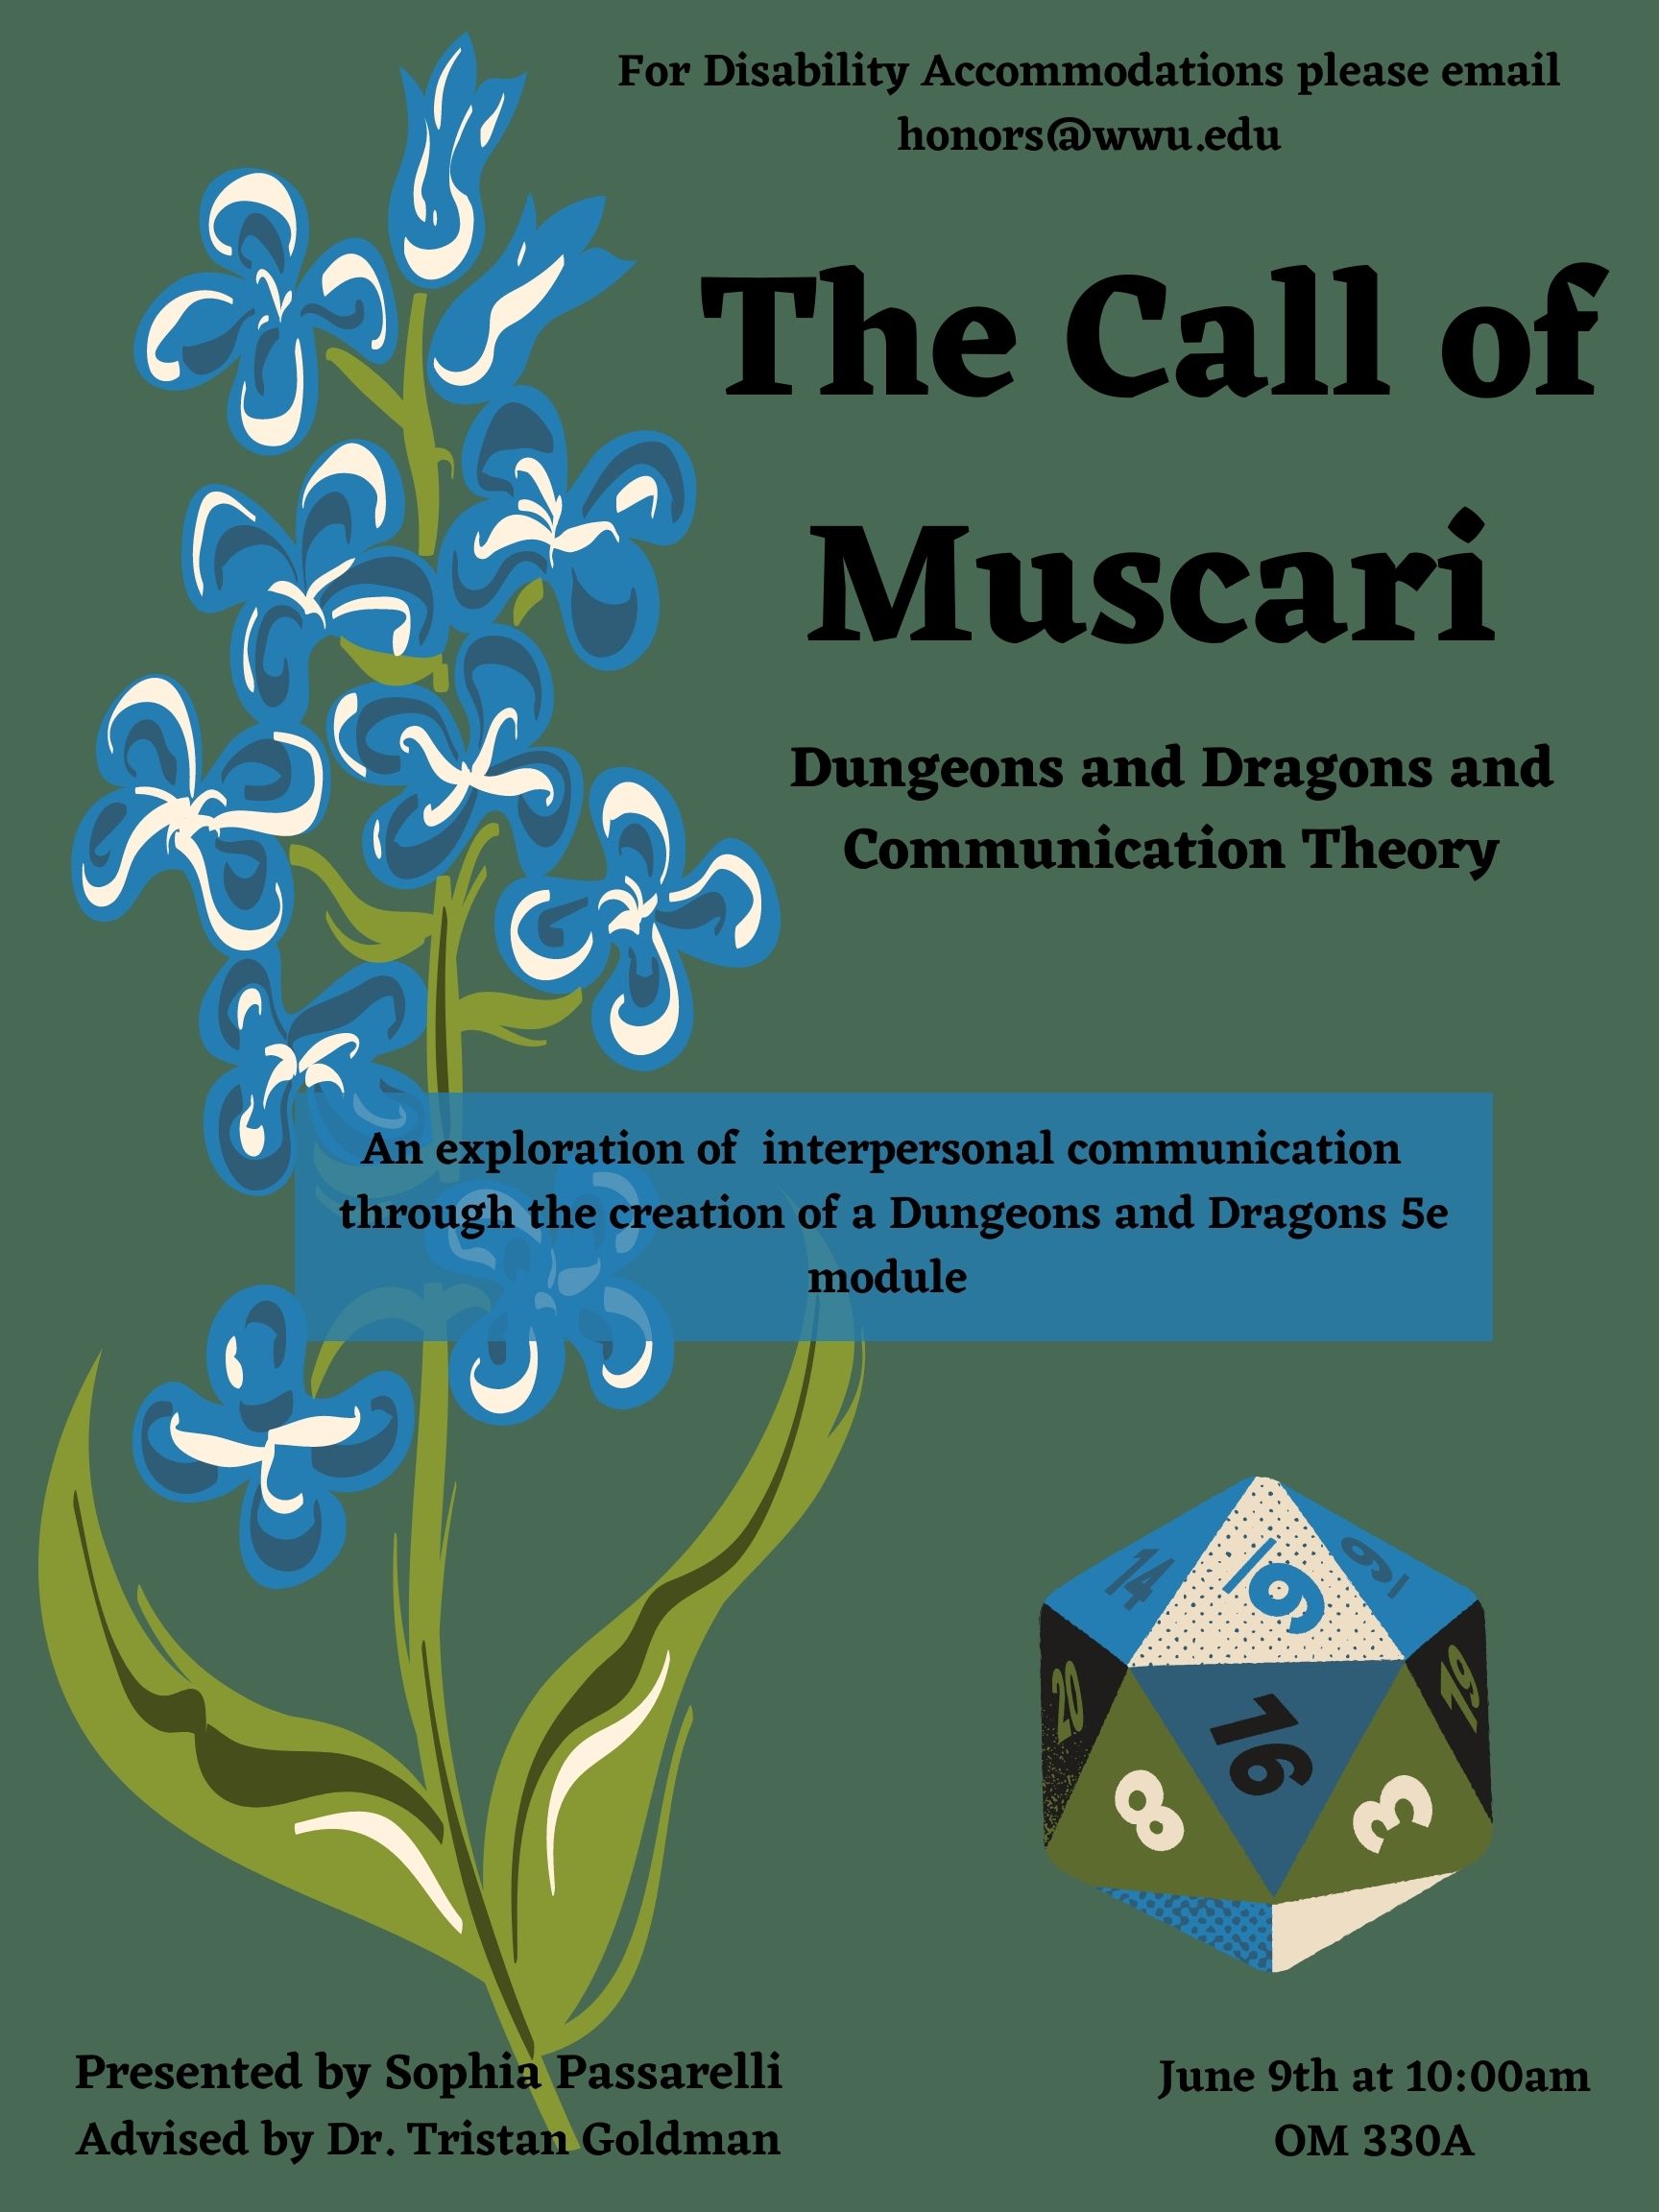 A green poster with blue flowers and a 20-sided dice. Text reads: "For Disability Accommodations, please email honors@wwu.edu. The Call of Muscari: Dungeons and Dragons and Communication Theory. An exploration of interpersonal communication through the creation of a Dungeons and Dragons 5e module. Presented by Sophia Passarelli Advised by Dr. Tristan Goldman. June 9th at 10:00am OM 330A."